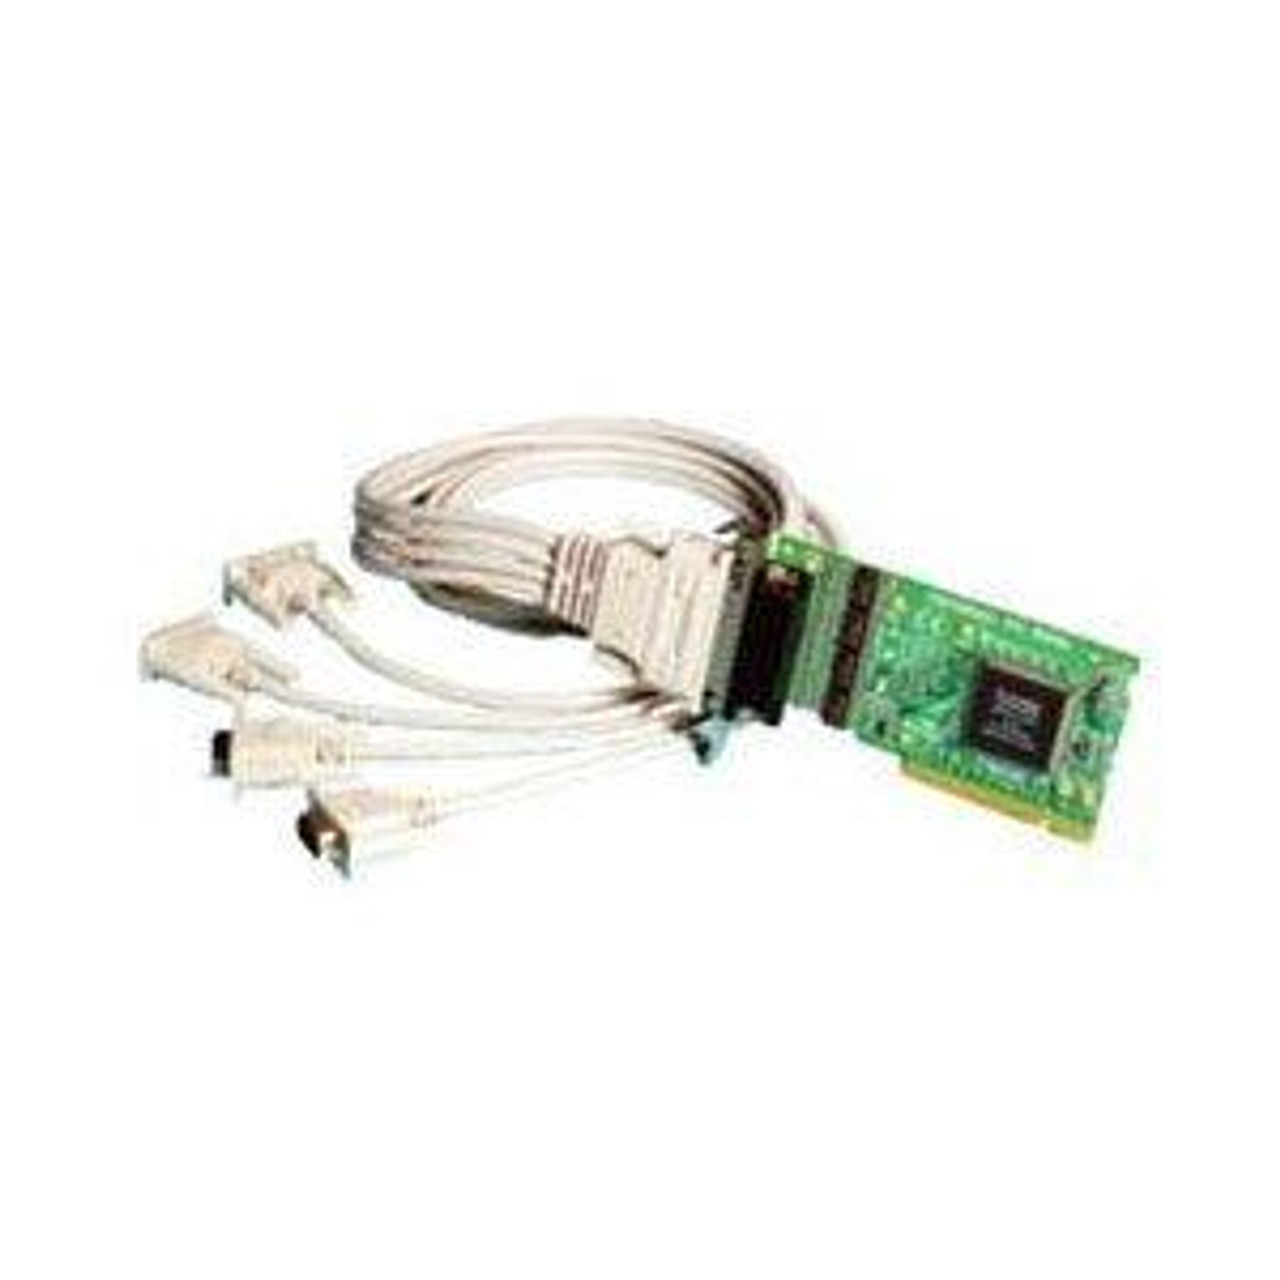 UC-260-001 Brainboxes 4 Port RS-232 Universal low-profile Multiport Serial Adapter Universal PCI 4 x DB-9 RS-232 Serial Via Cable Half-length Plug-in Card